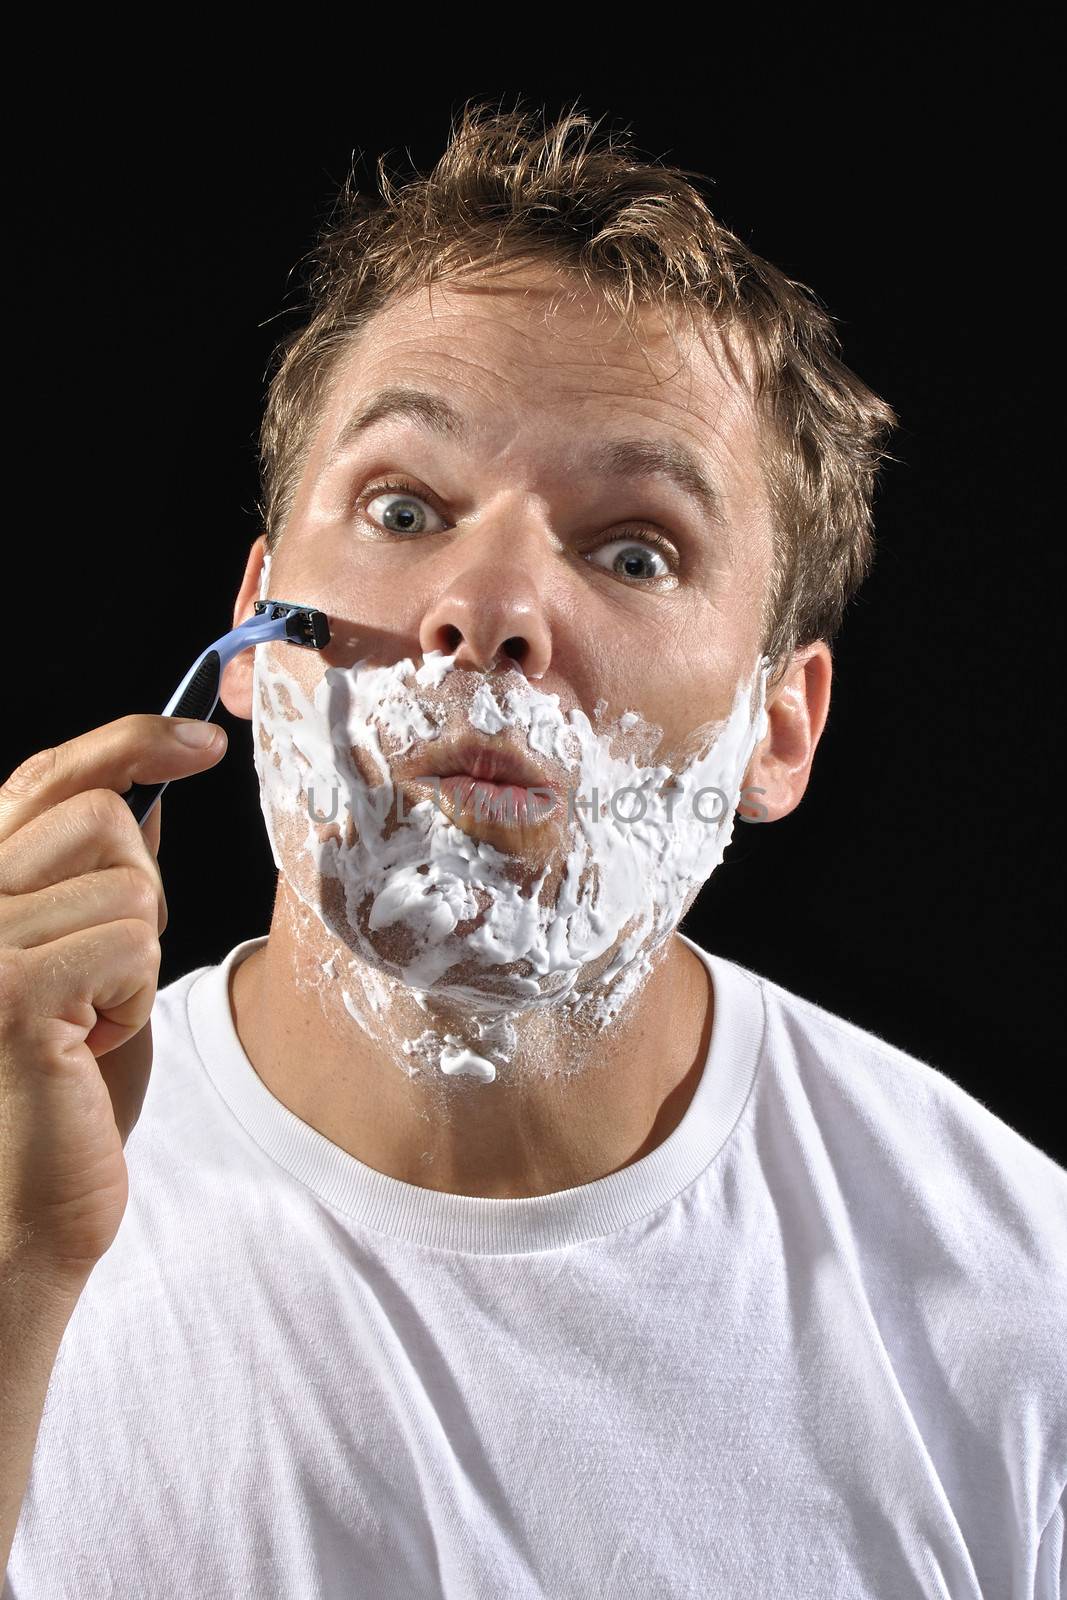 Handsome Caucasian man with messy bed head hair makes funny face while shaving his cheek on black background